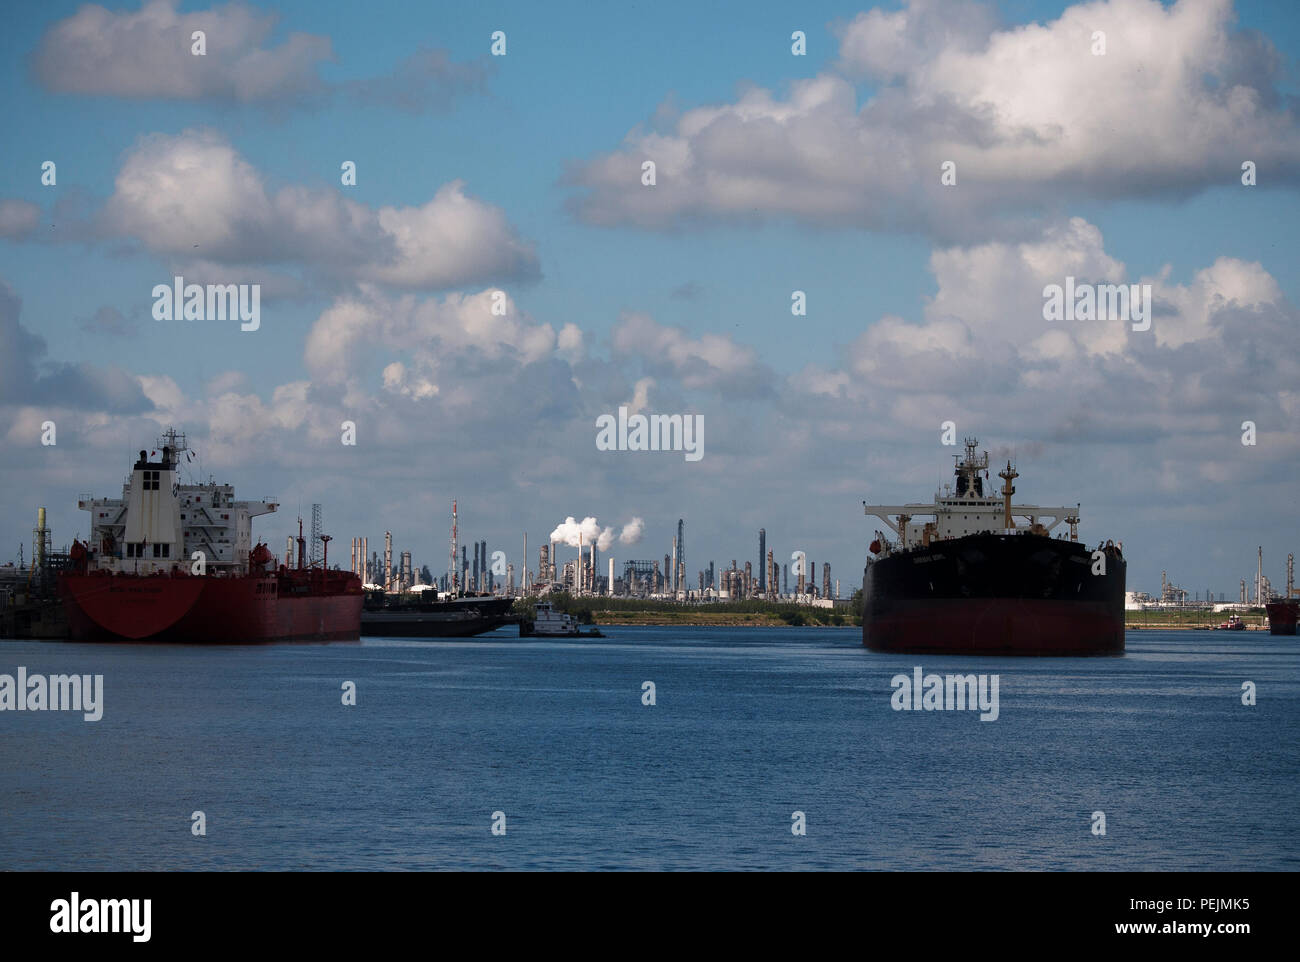 Oil tankers docked in Houston as refineries along the shipping channel process the crude into a variety of chemicals, gasoline and lubricants. Stock Photo